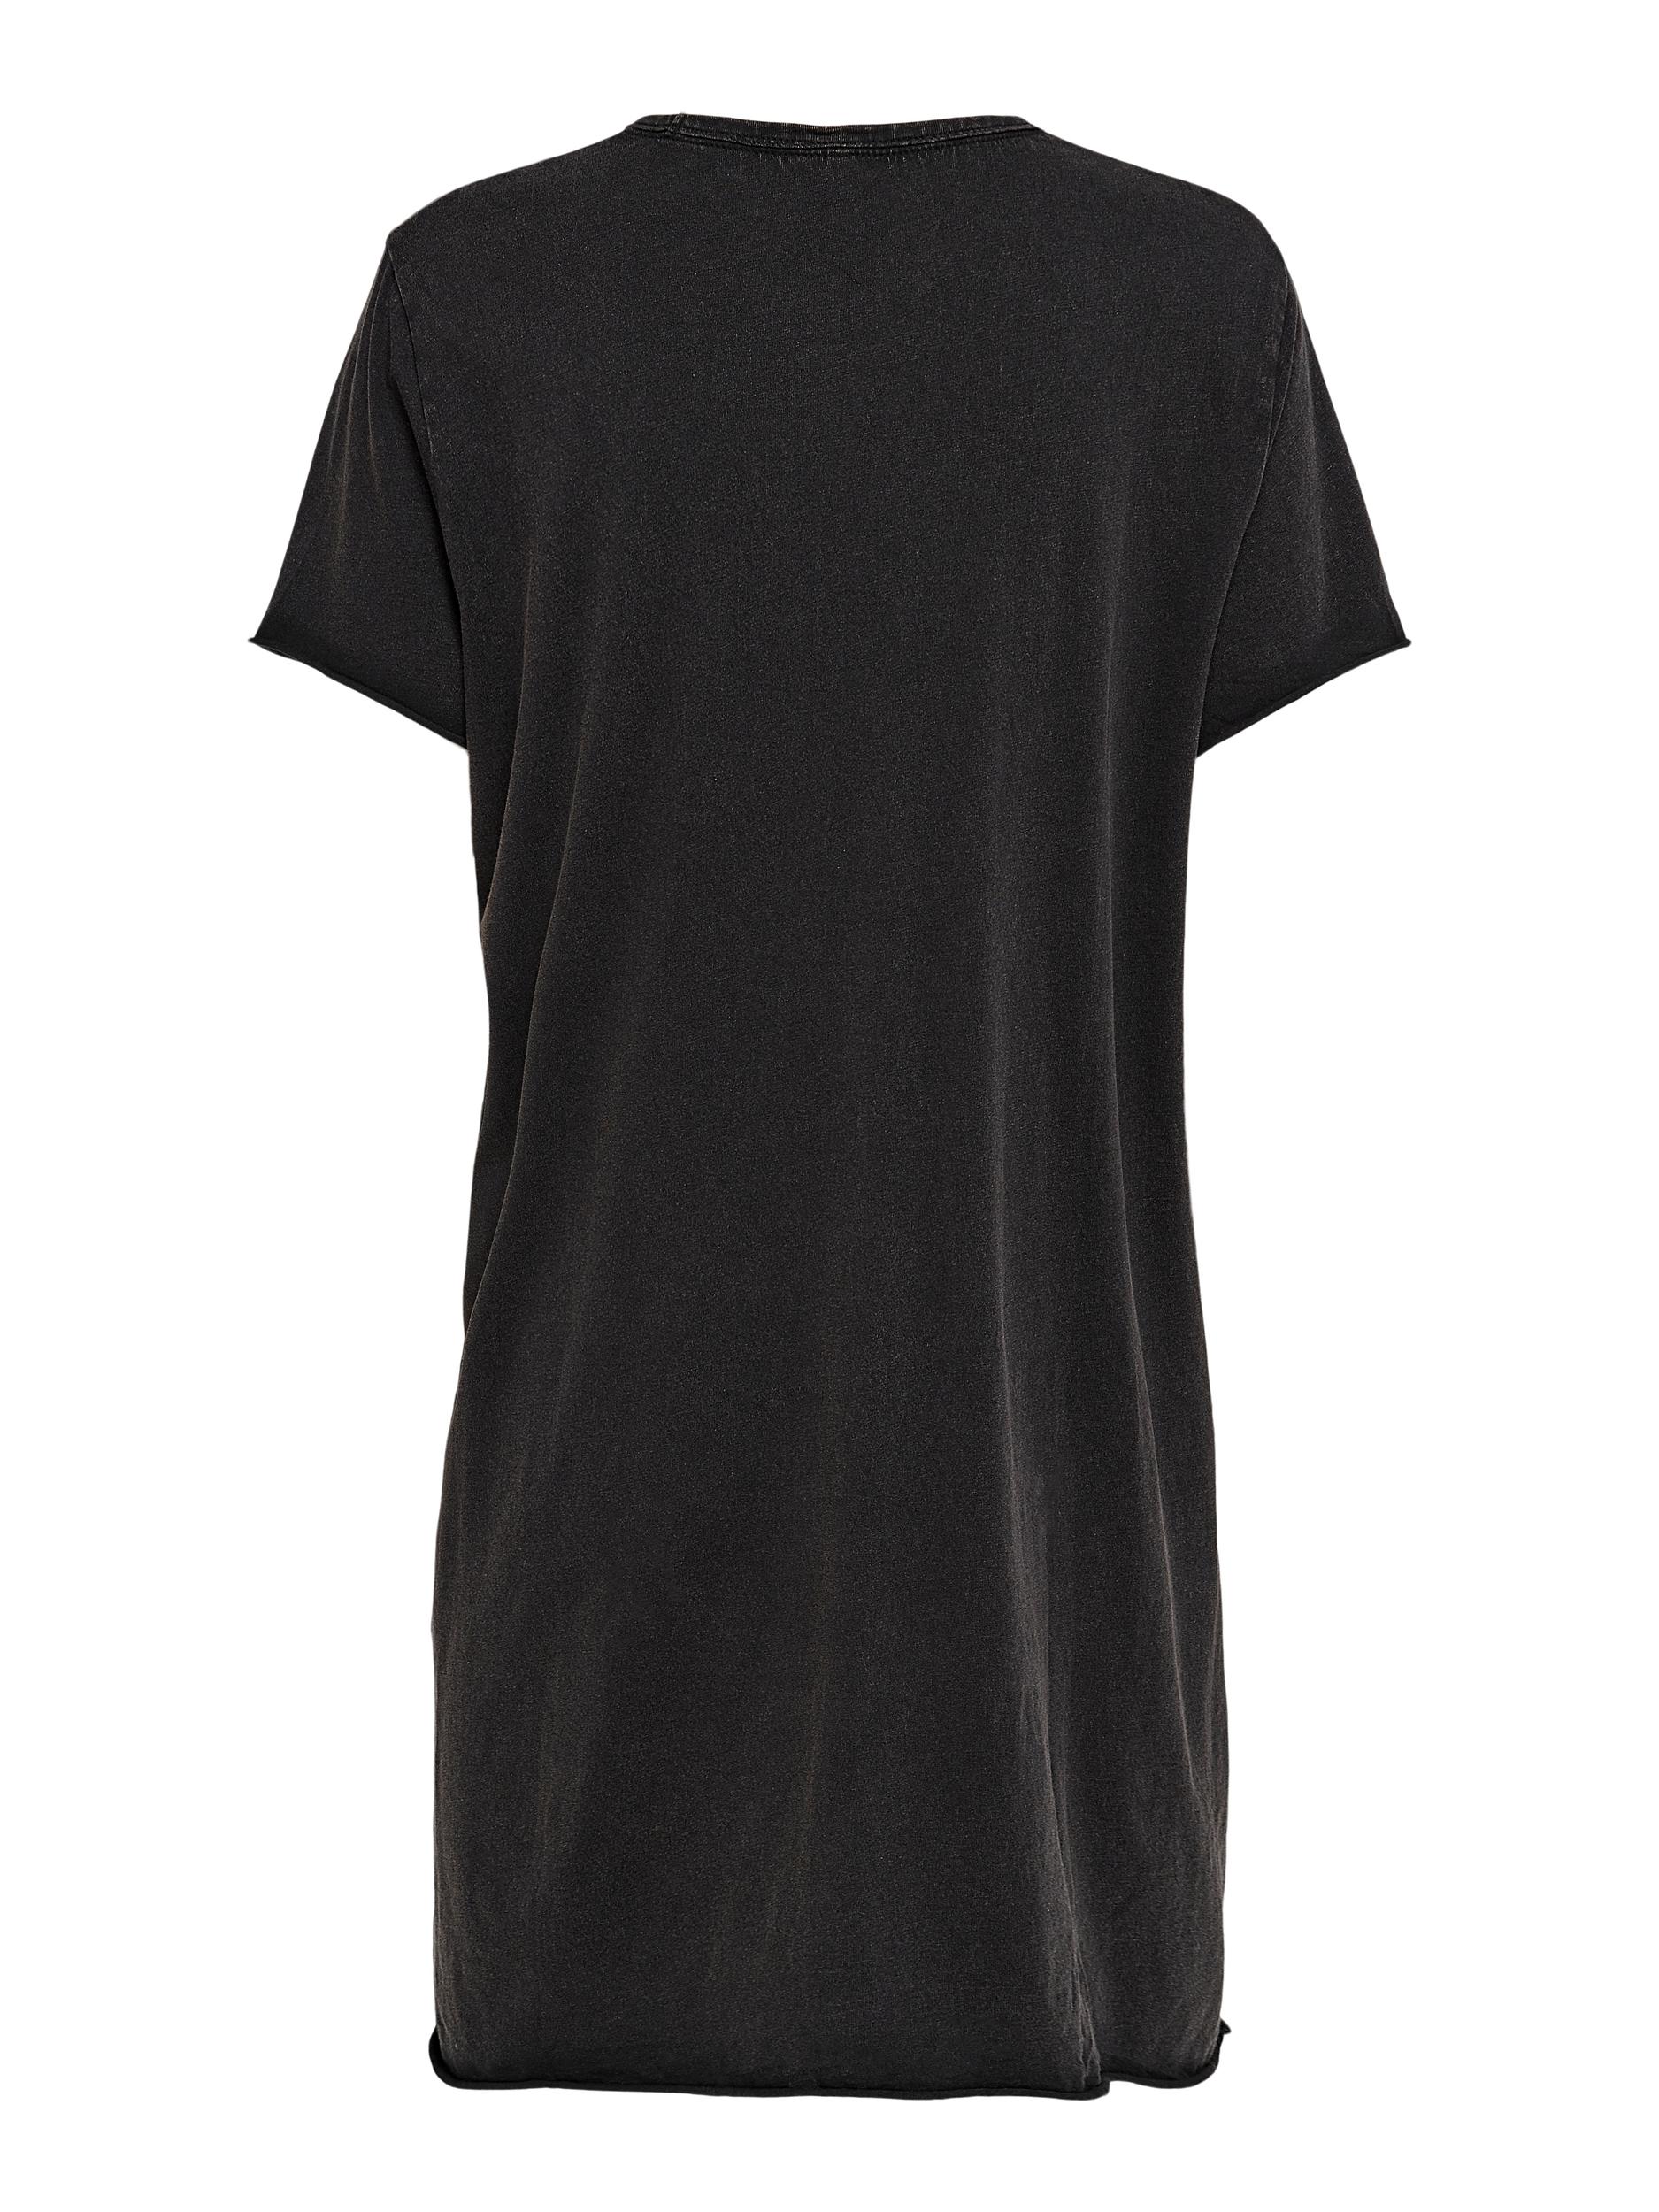 Lucy faded look t-shirt dress, BLACK PASSION, large